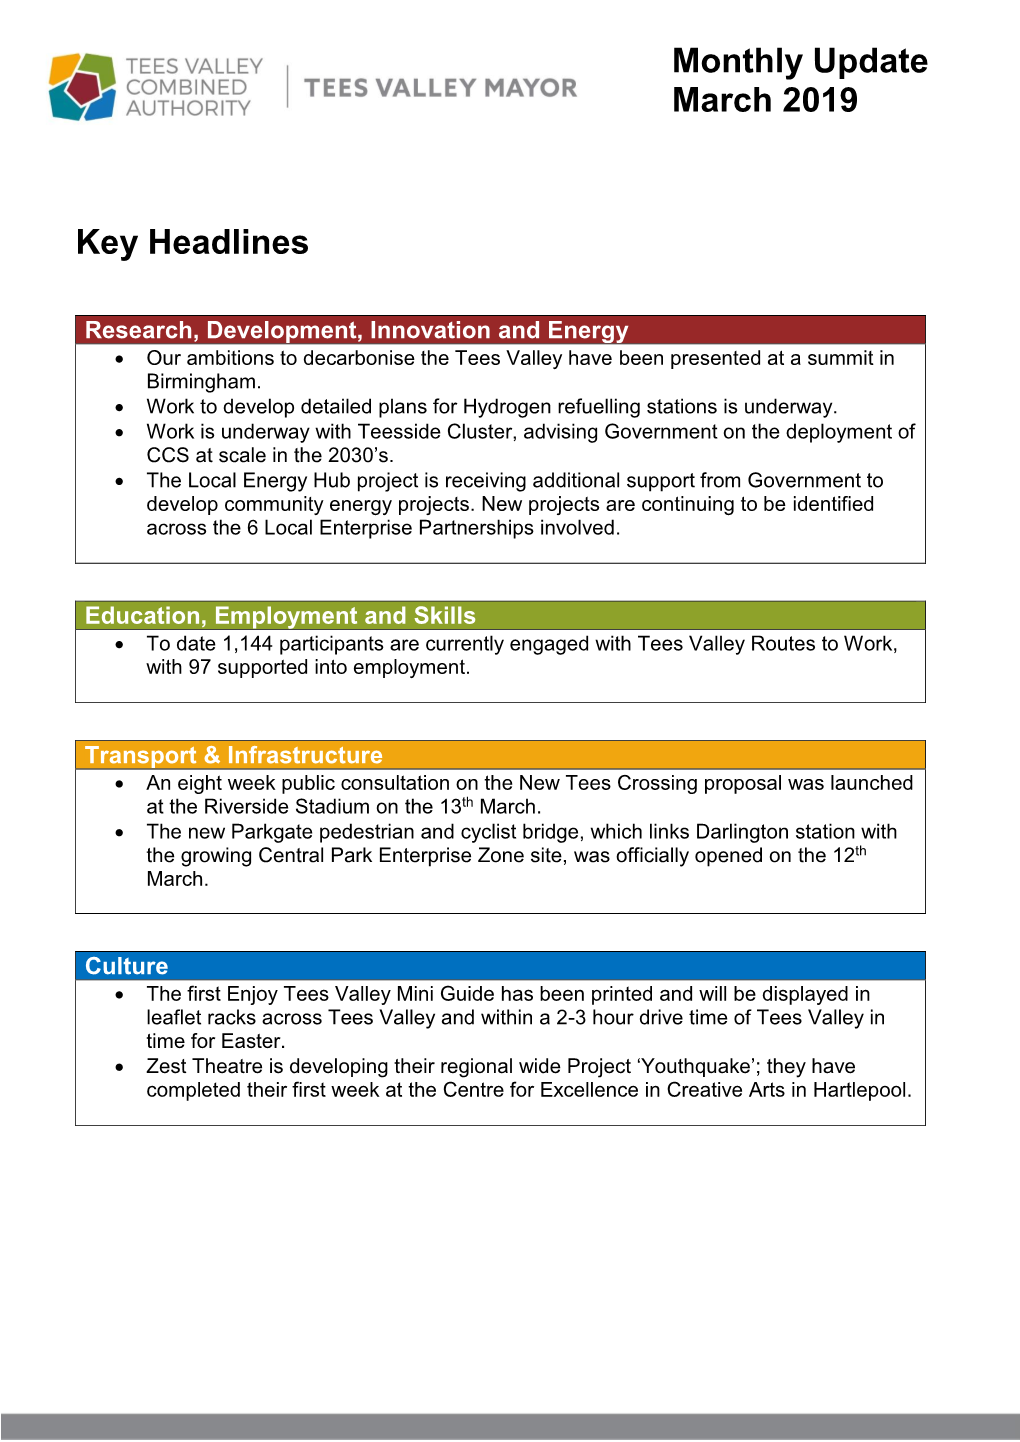 Key Headlines Monthly Update March 2019